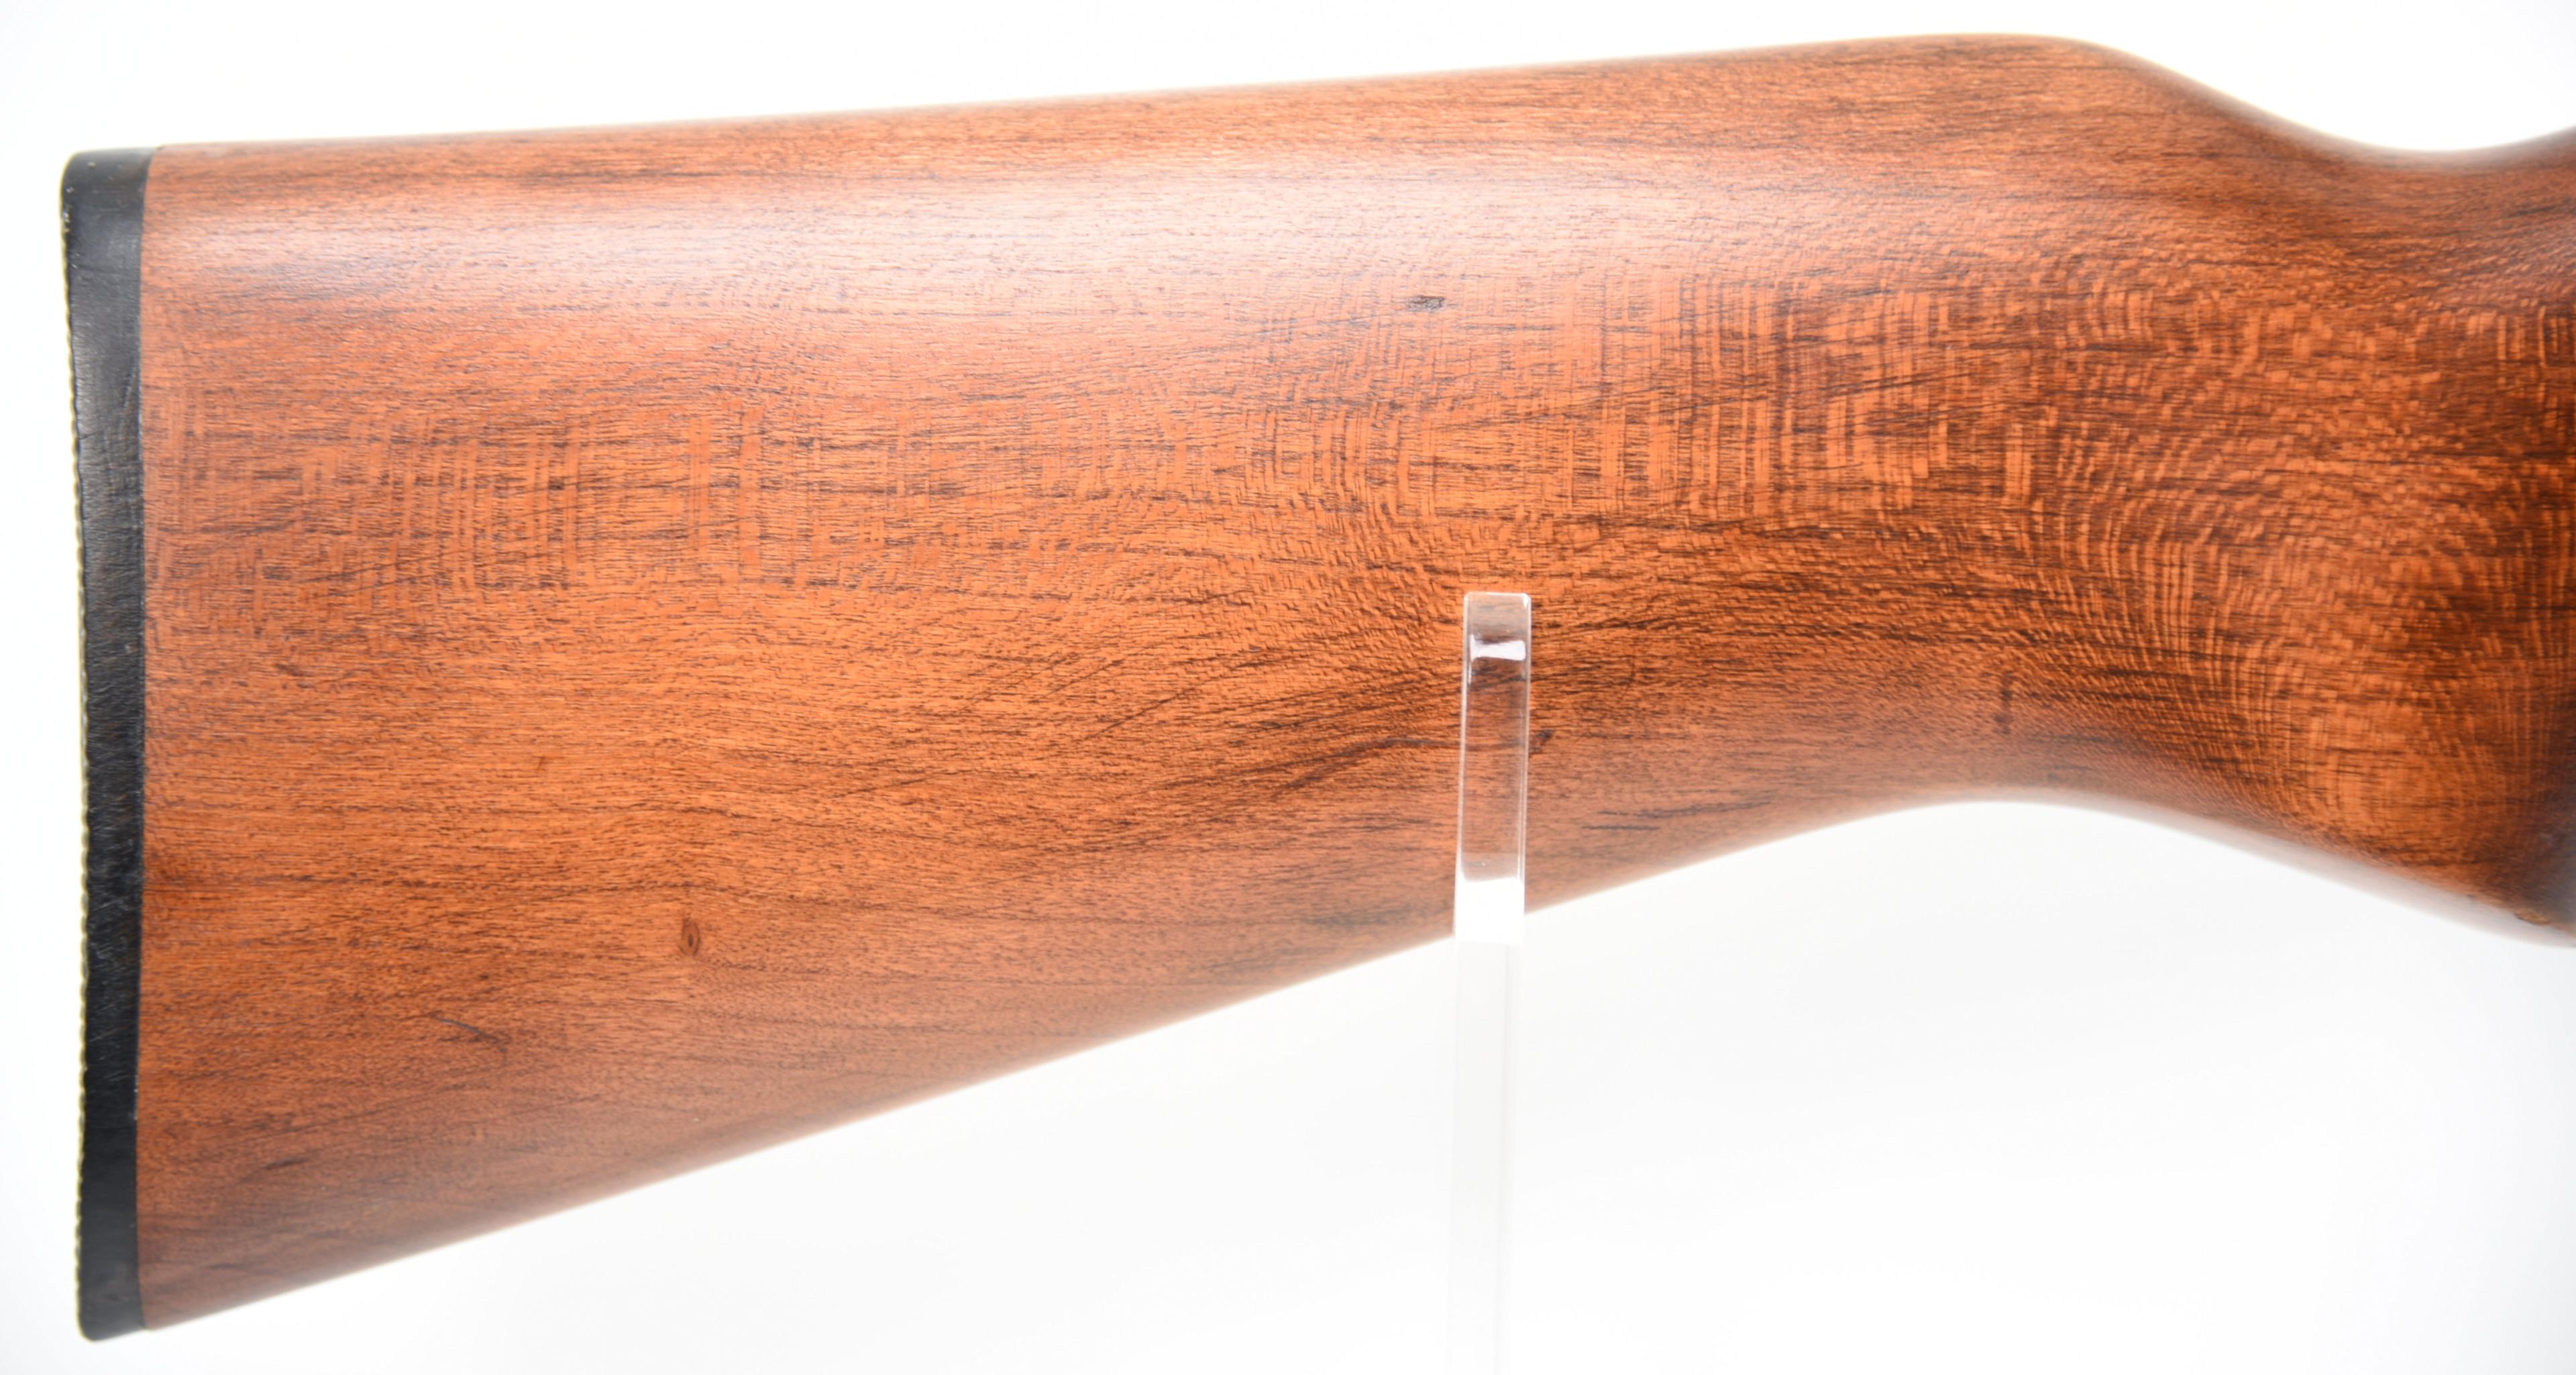 Winchester 67A Bolt Action Rifle